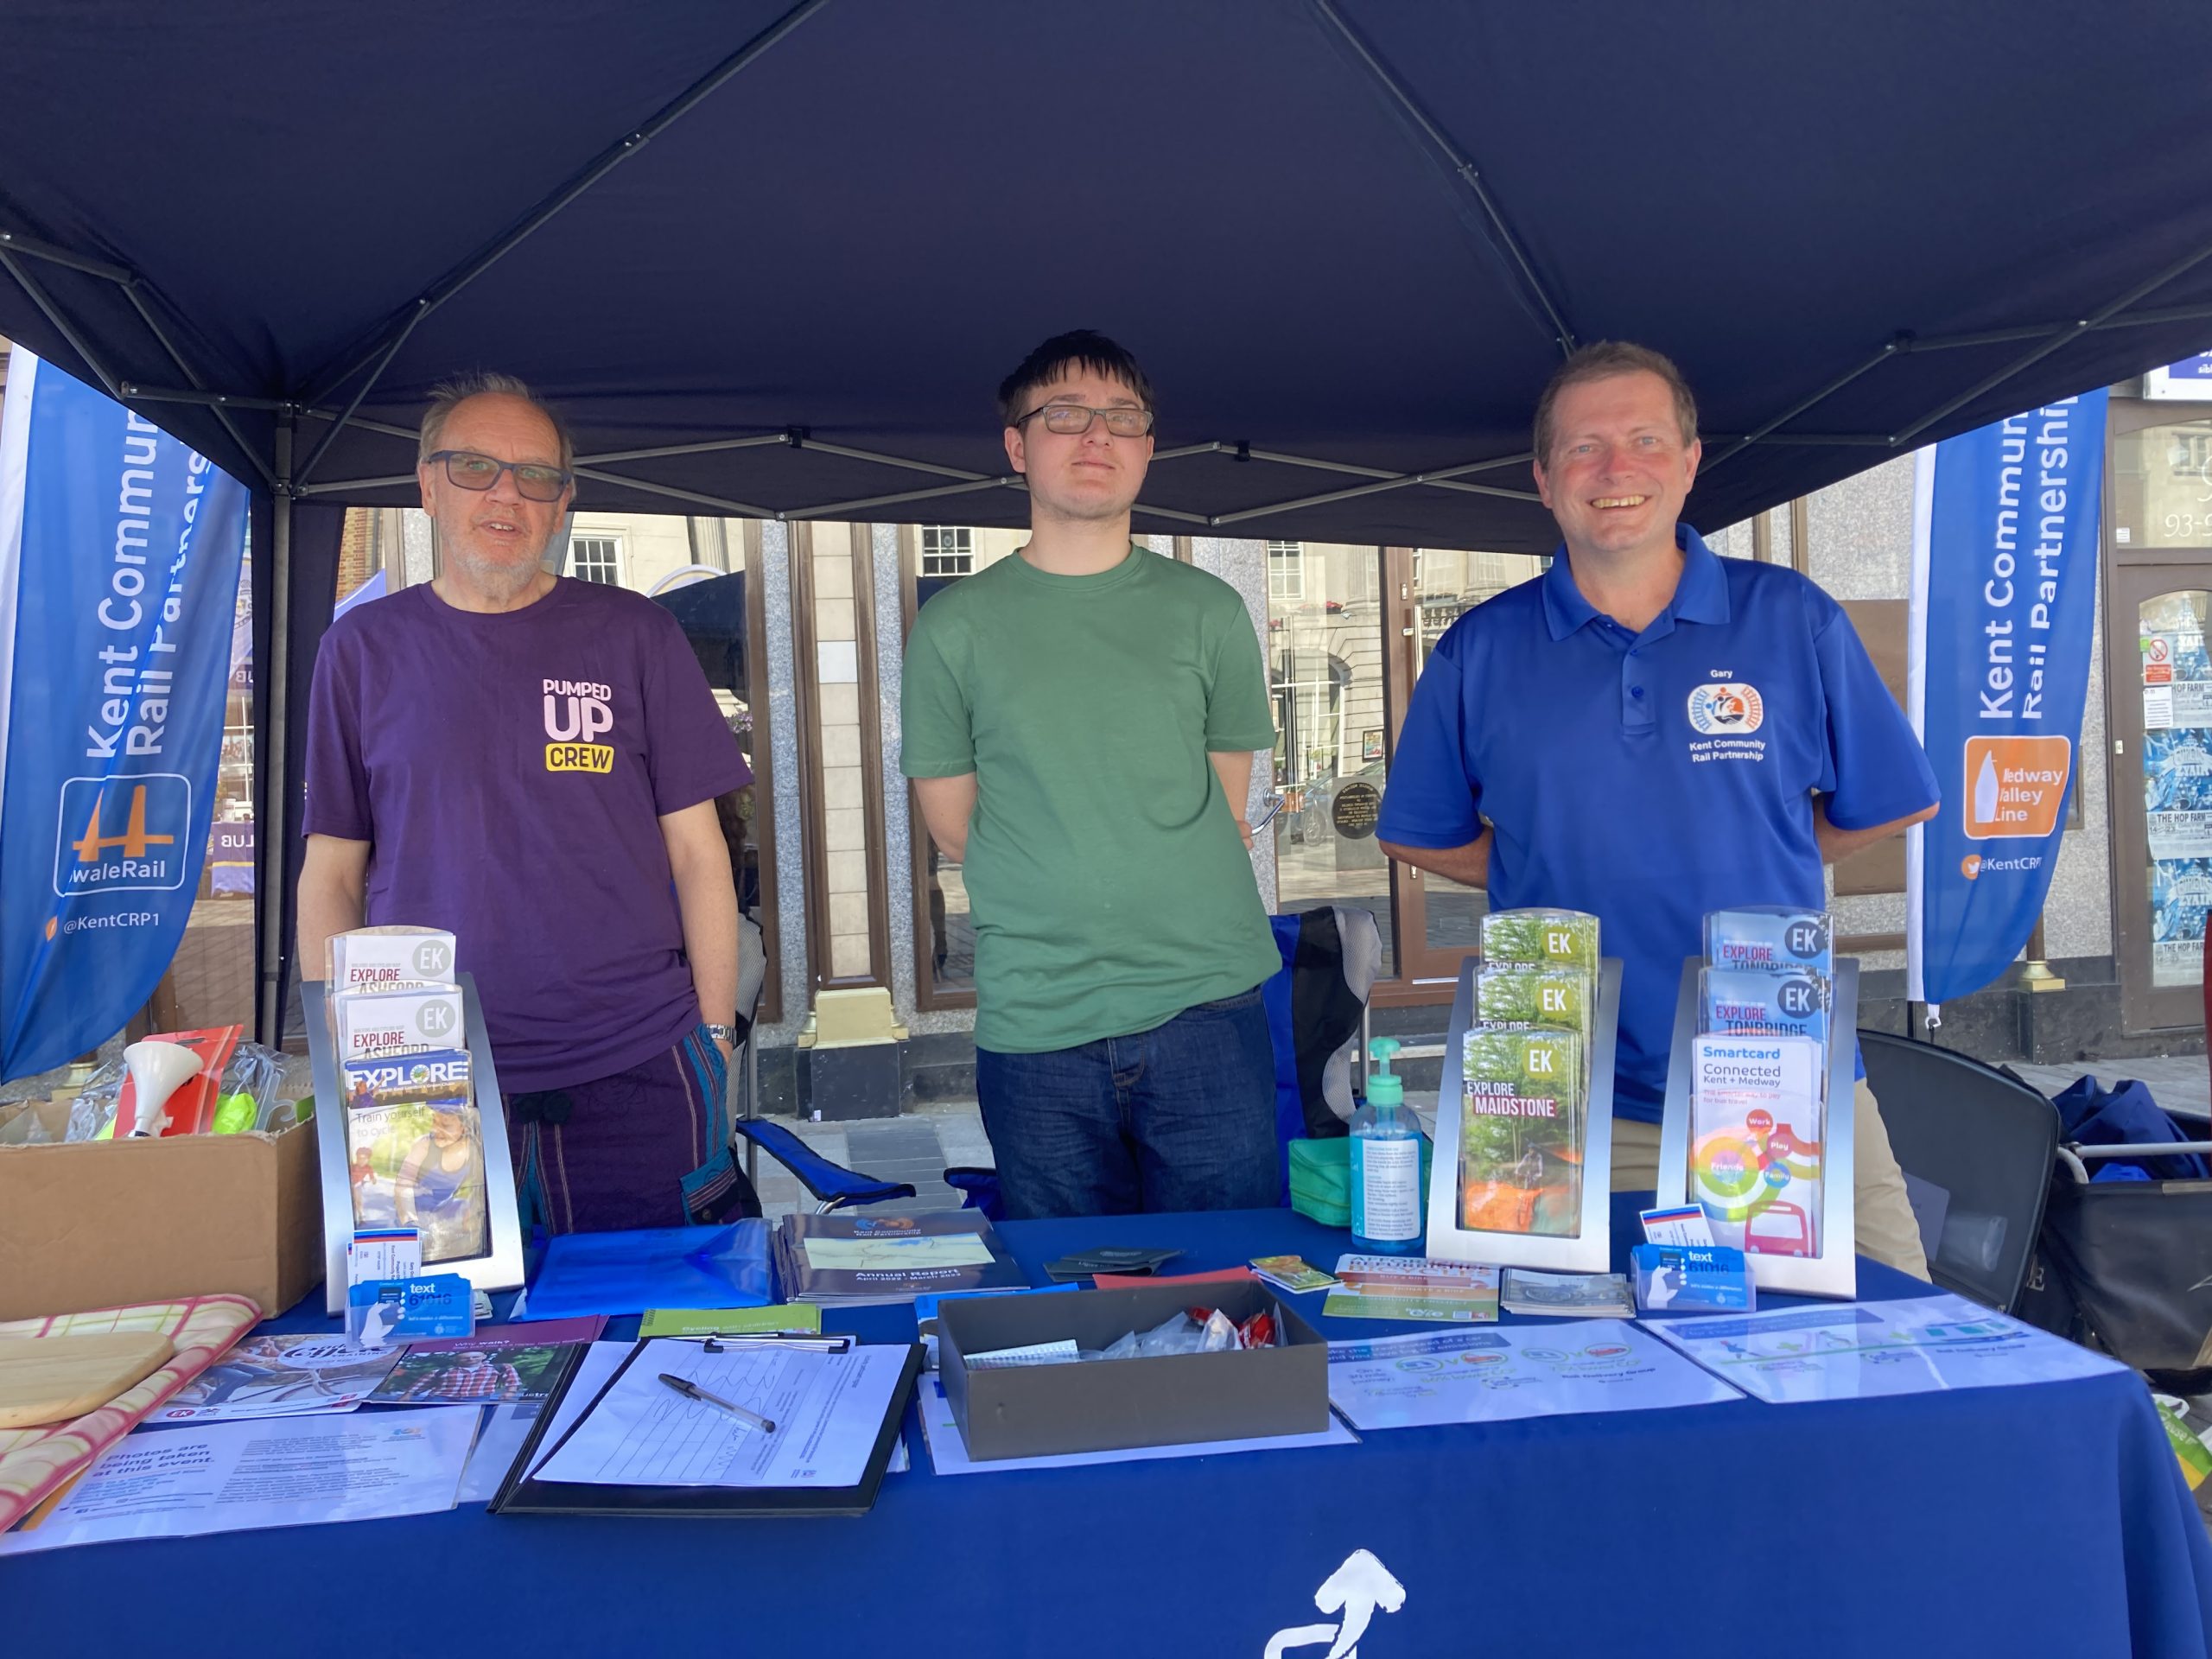 Chris, Dominic and Gary at under the gazebo our stall. There is an array of brochures about where to cycle in Kent.